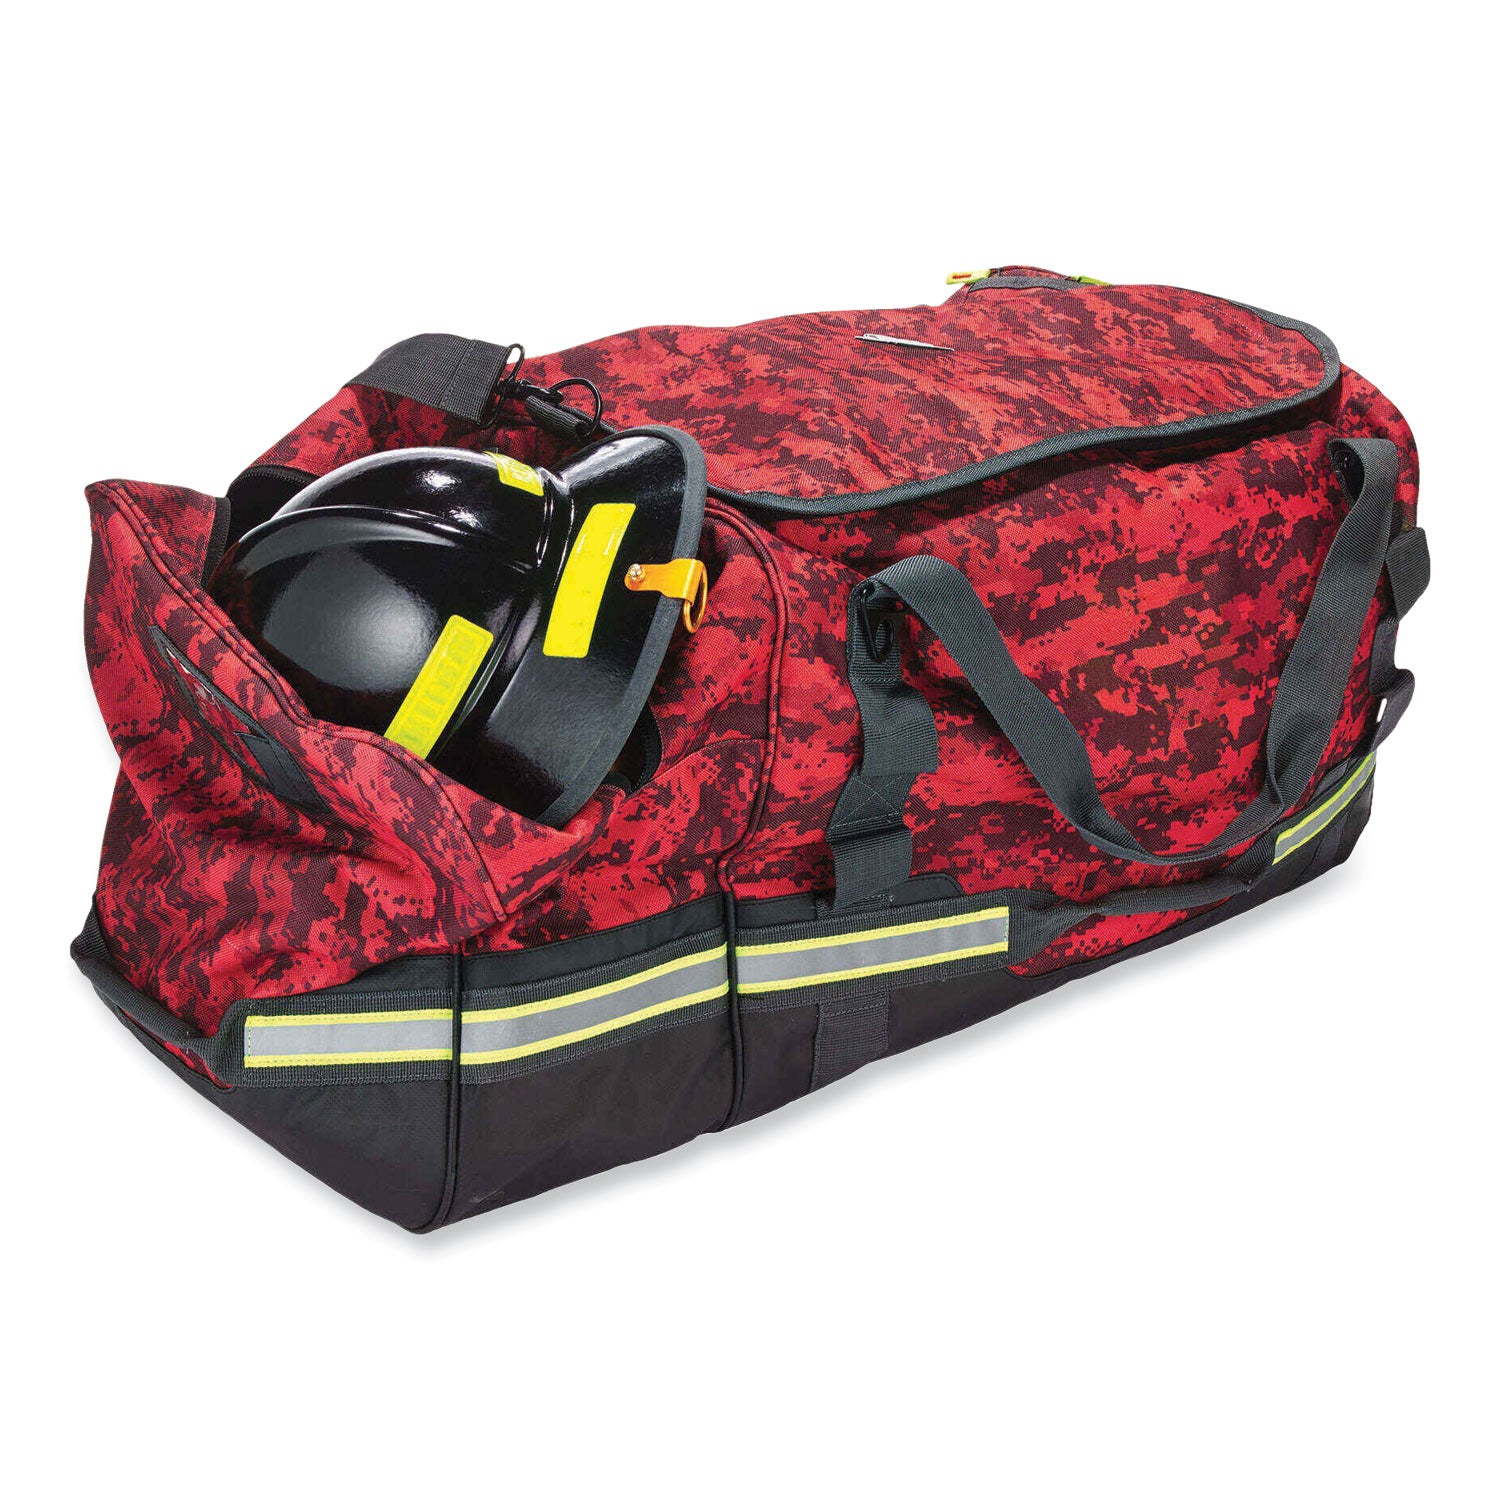 arsenal-5008-fire-+-safety-gear-bag-16-x-31-x-155-red-camo-ships-in-1-3-business-days_ego13008 - 2